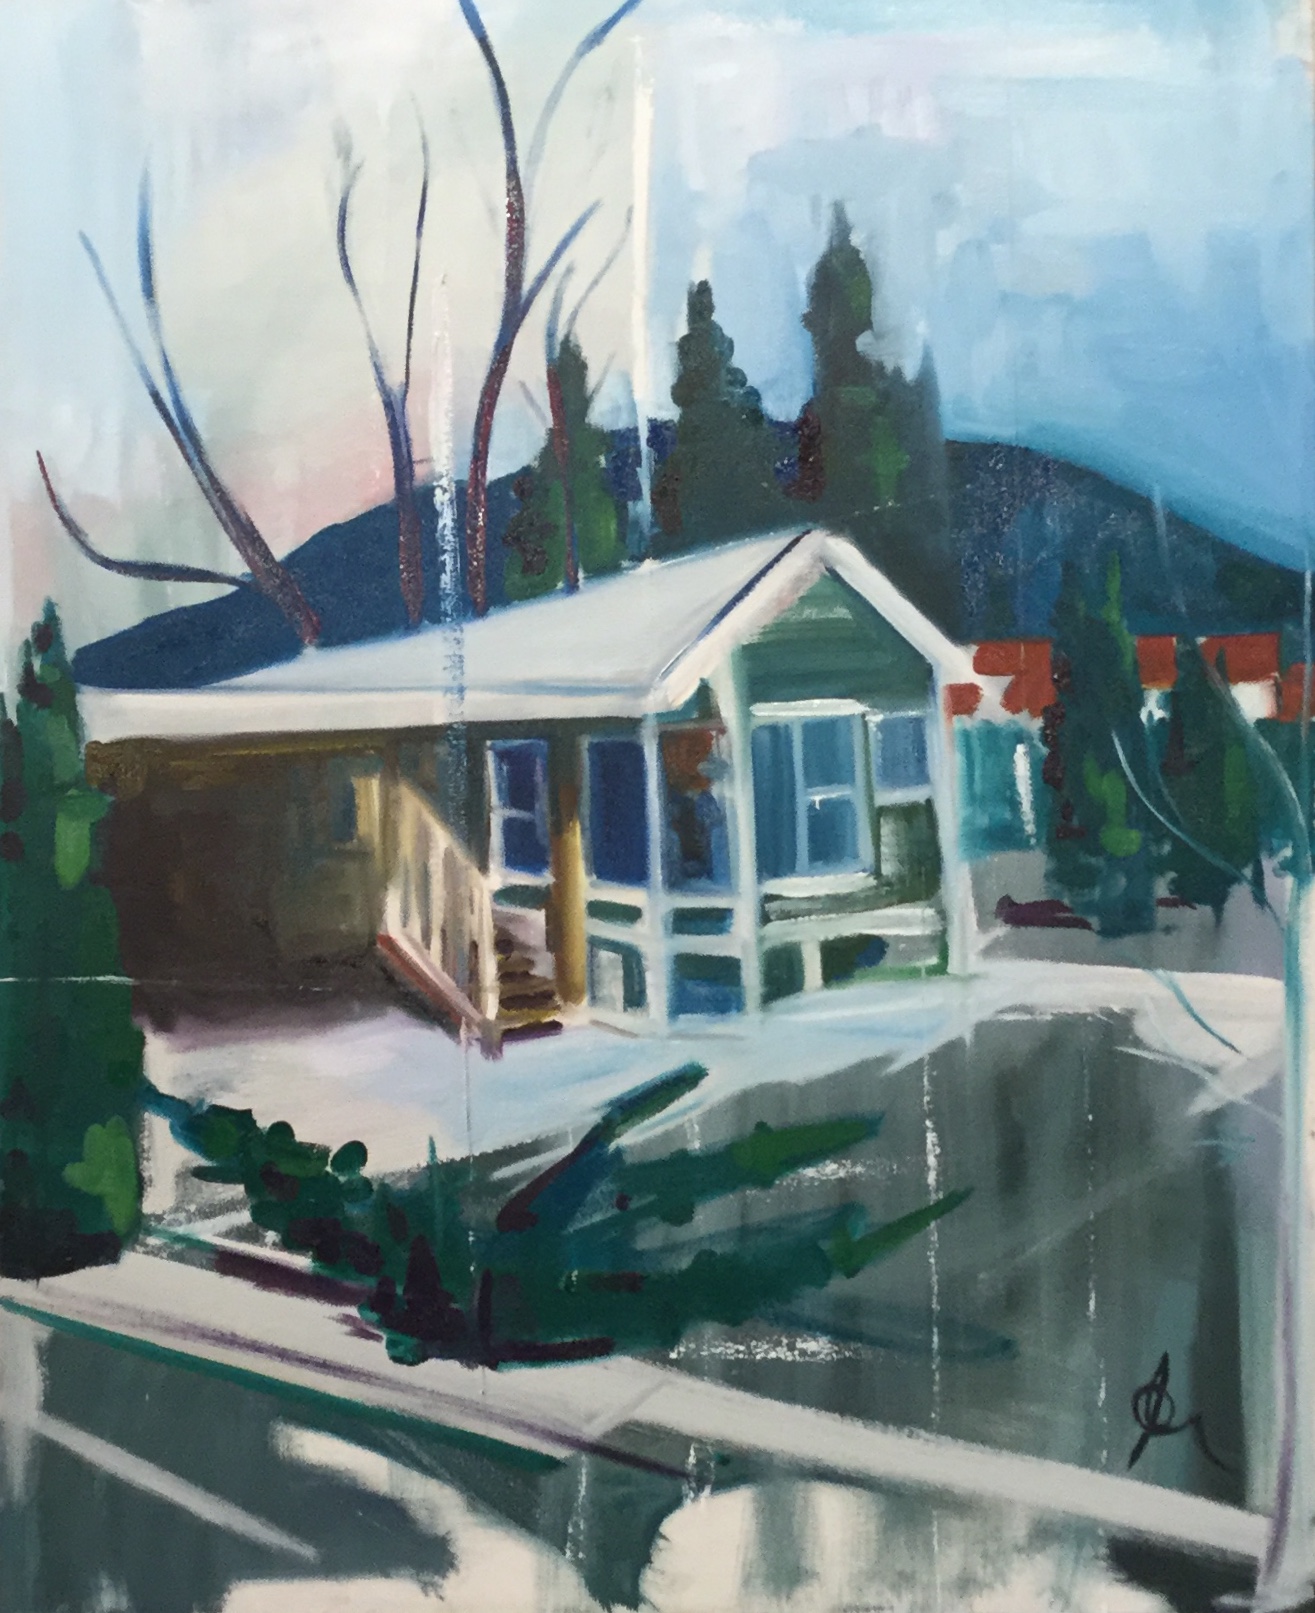 Cabin Two: 16" x 20", oil on canvas, SOLD